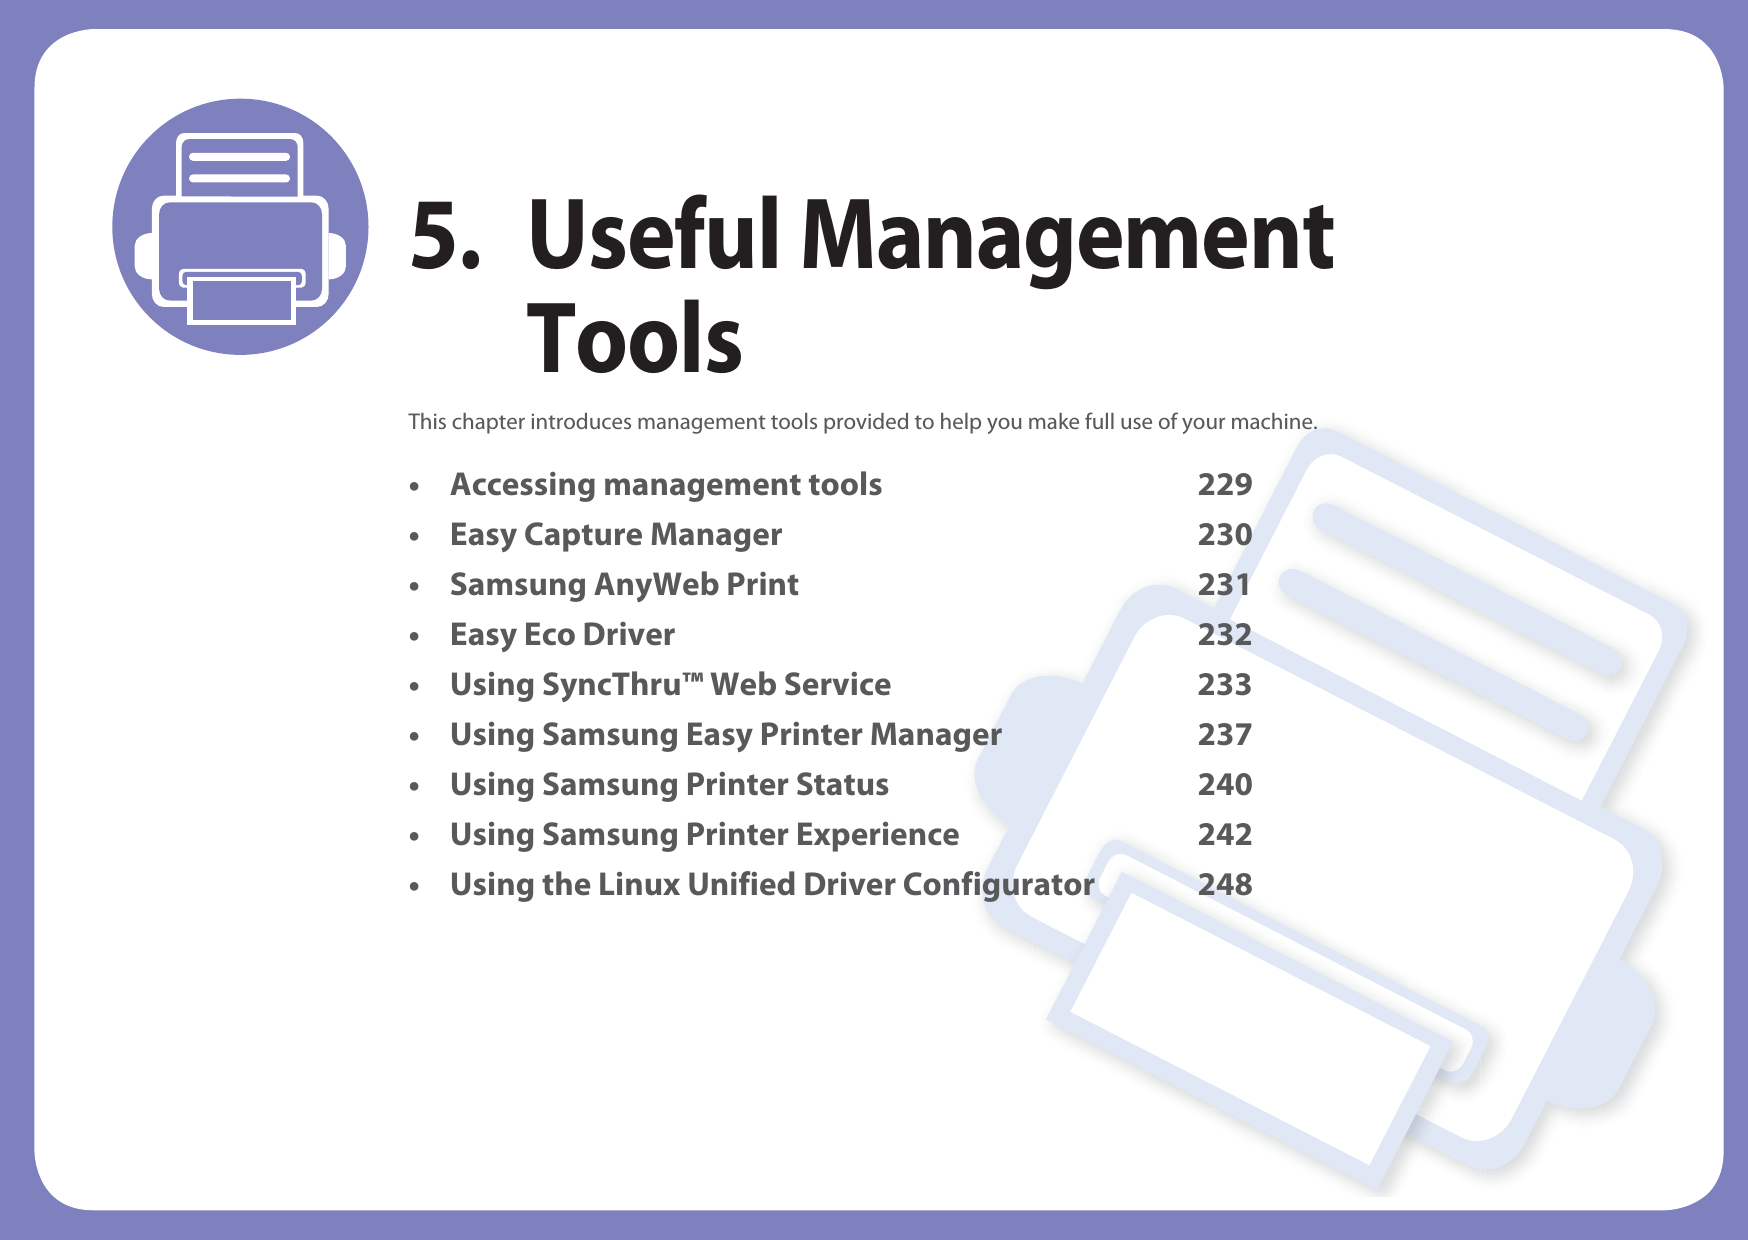 5. Useful Management ToolsThis chapter introduces management tools provided to help you make full use of your machine. • Accessing management tools 229• Easy Capture Manager 230• Samsung AnyWeb Print 231• Easy Eco Driver 232• Using SyncThru™ Web Service 233• Using Samsung Easy Printer Manager 237• Using Samsung Printer Status 240• Using Samsung Printer Experience 242• Using the Linux Unified Driver Configurator 248